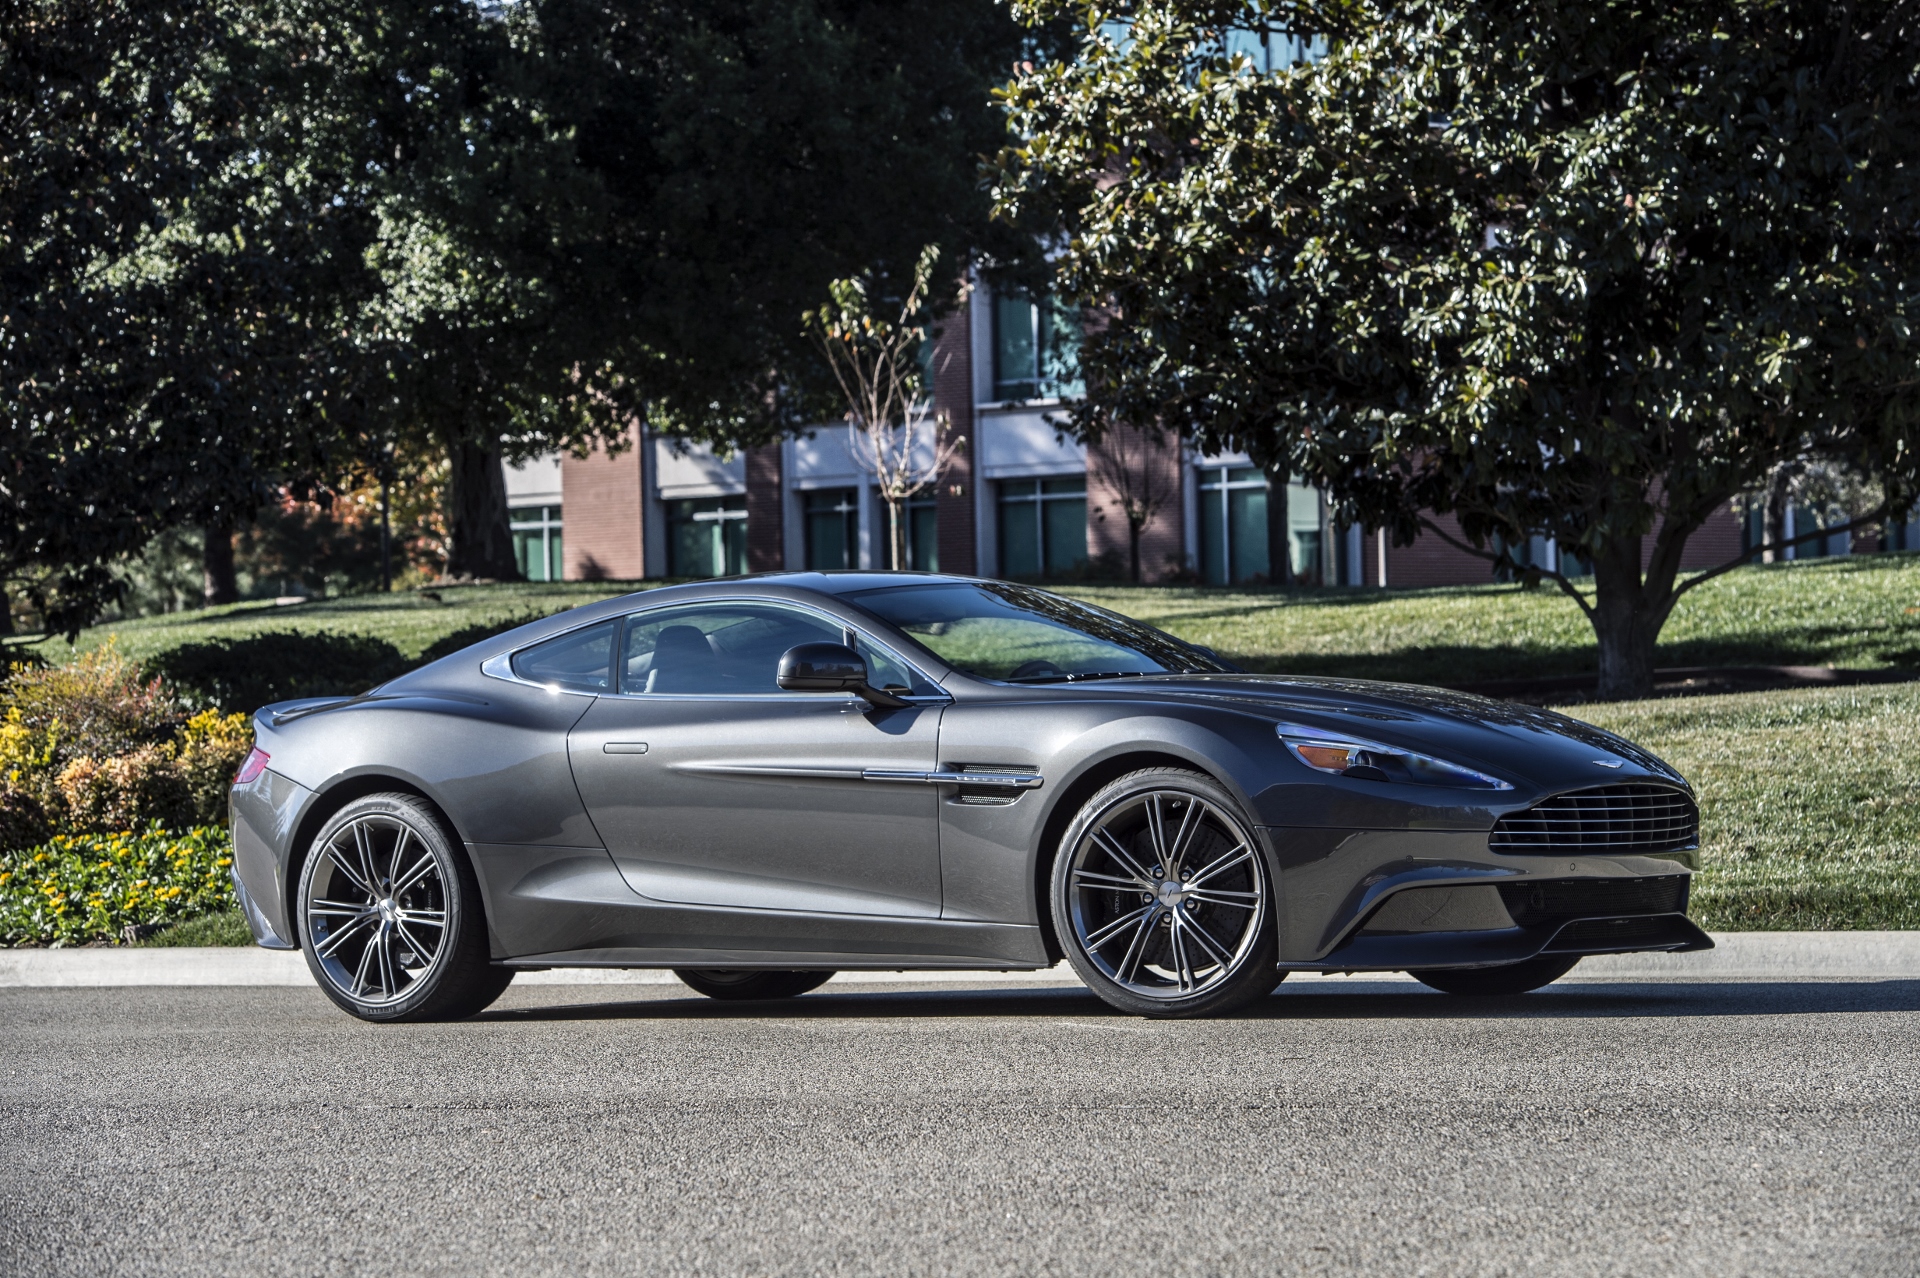 2016 Aston Martin Vanquish Summary Review - The Car Connection